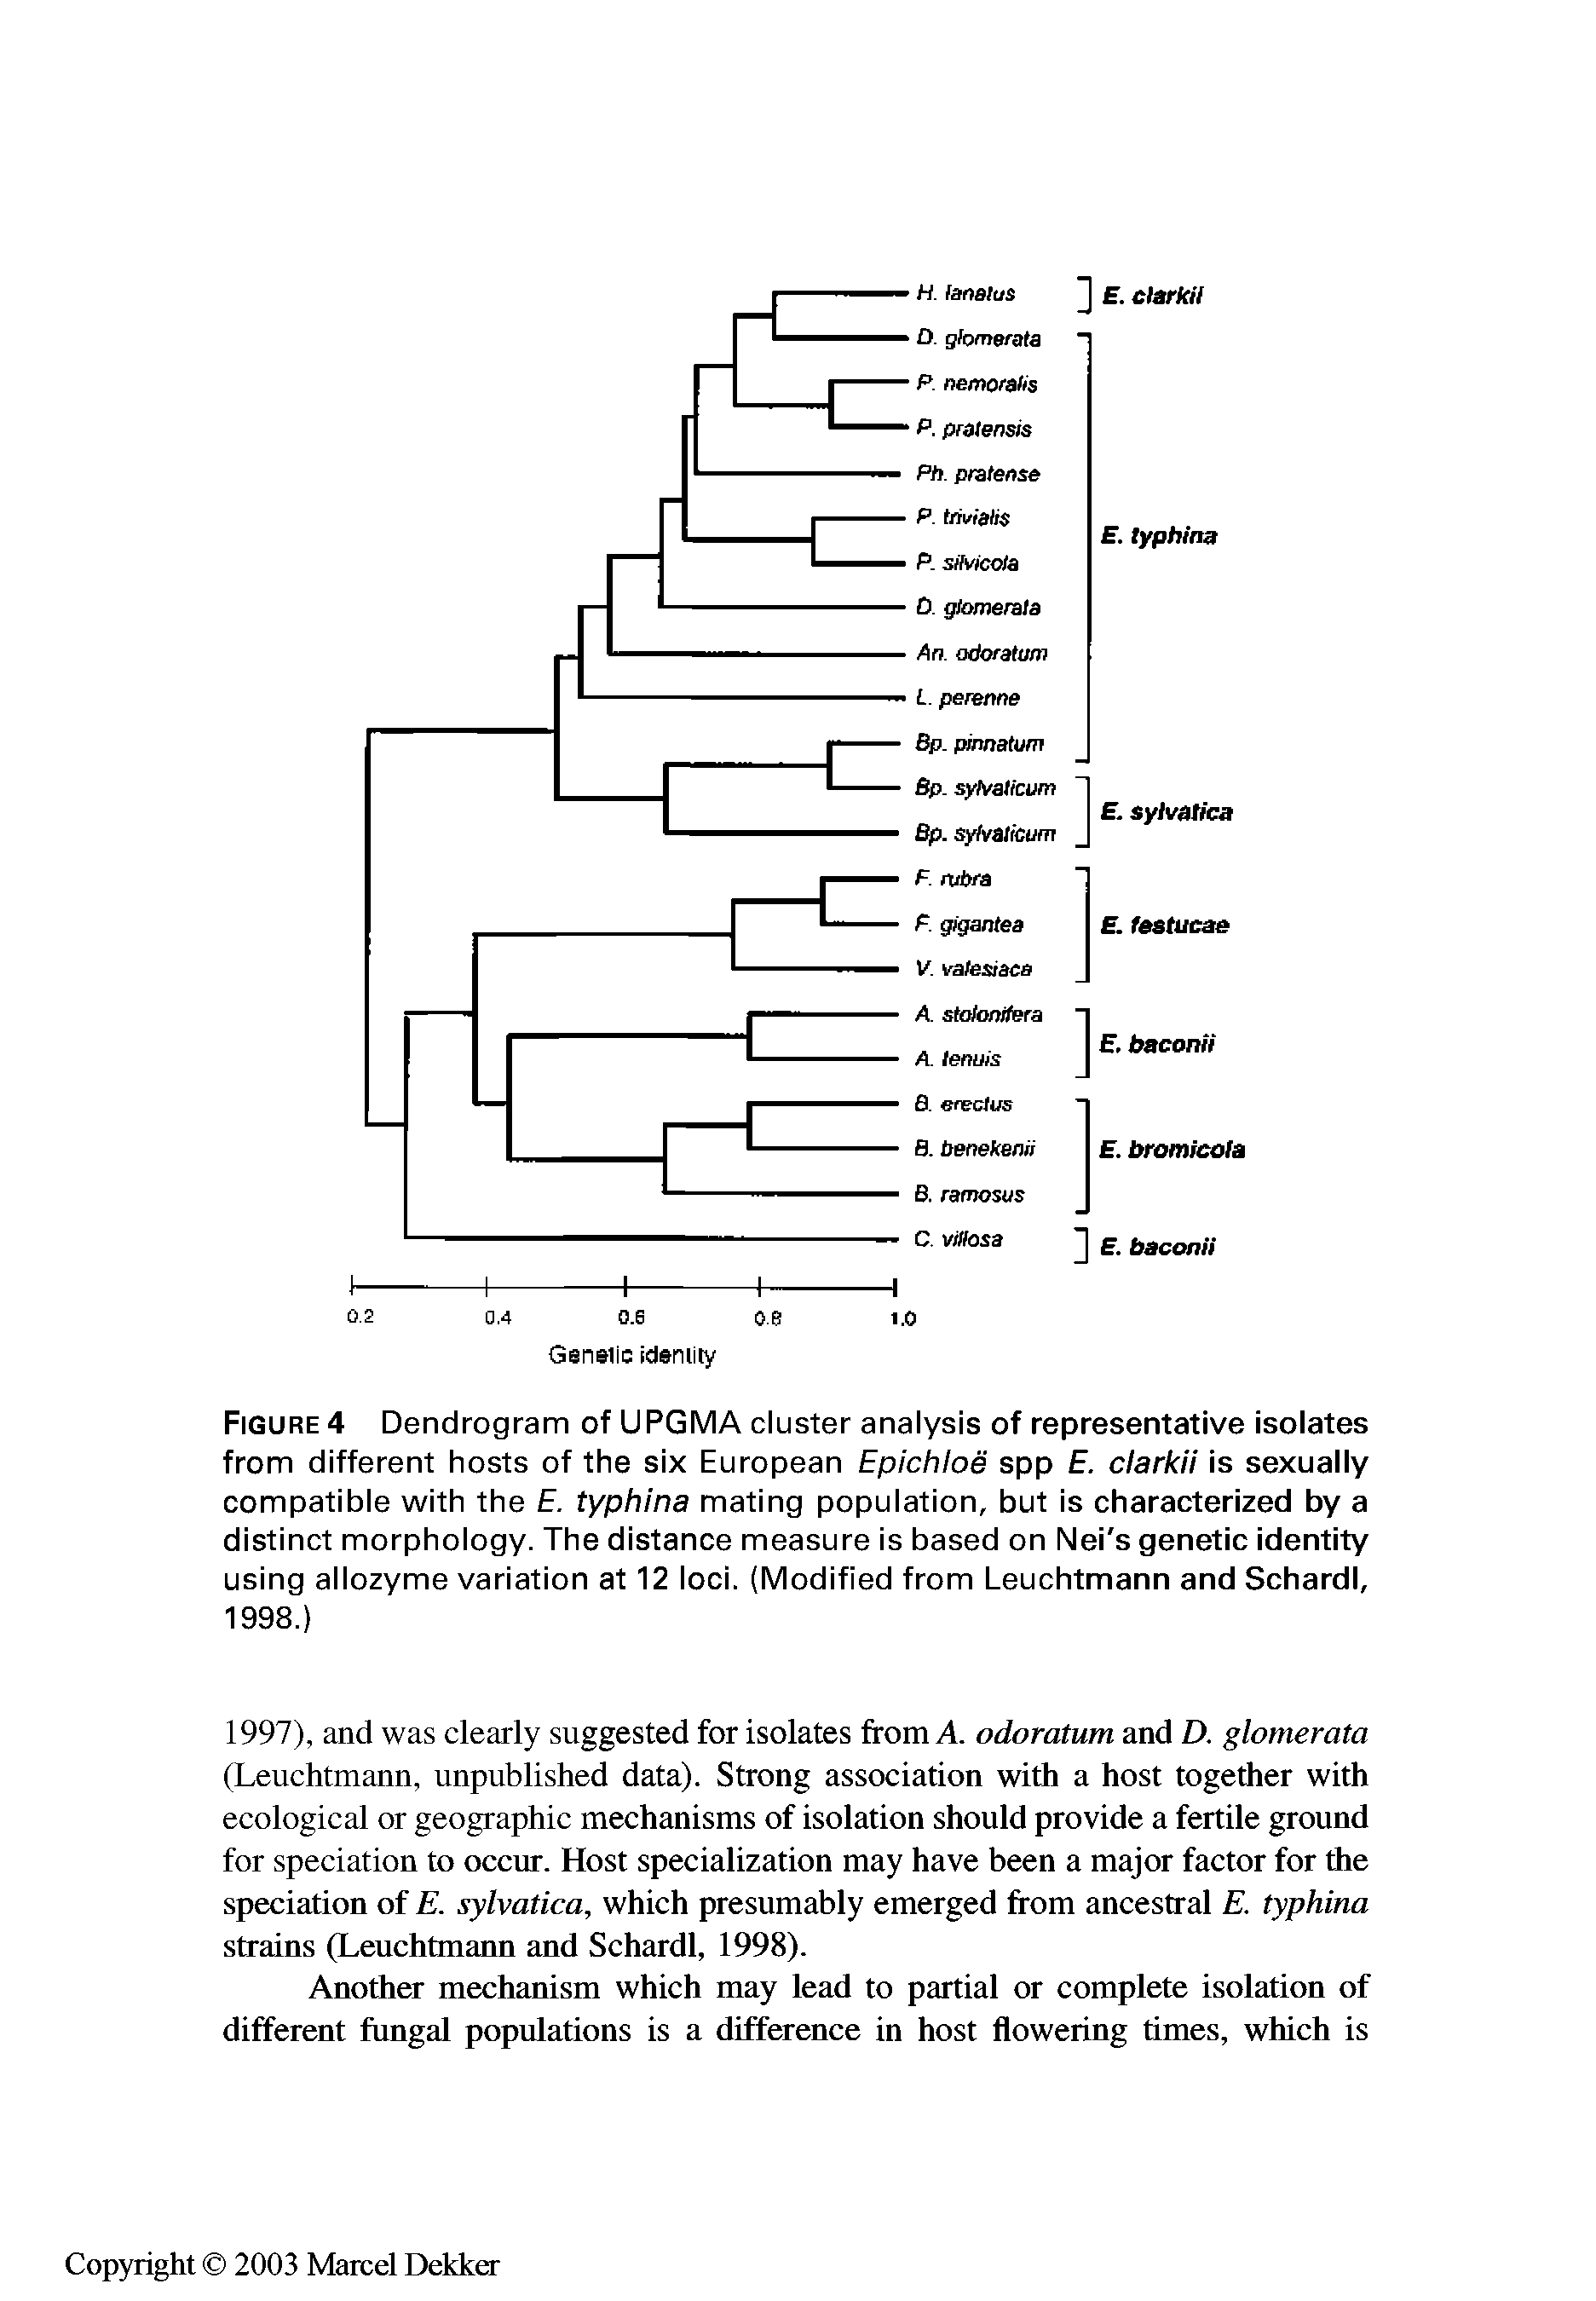 Figure 4 Dendrogram of UPGMA cluster analysis of representative isolates from different hosts of the six European Epichloe spp E. clarkii is sexually compatible with the E. typhina mating population, but is characterized by a distinct morphology. The distance measure is based on Nei s genetic identity using allozyme variation at 12 loci. (Modified from Leuchtmann and Schardl, 1998.)...